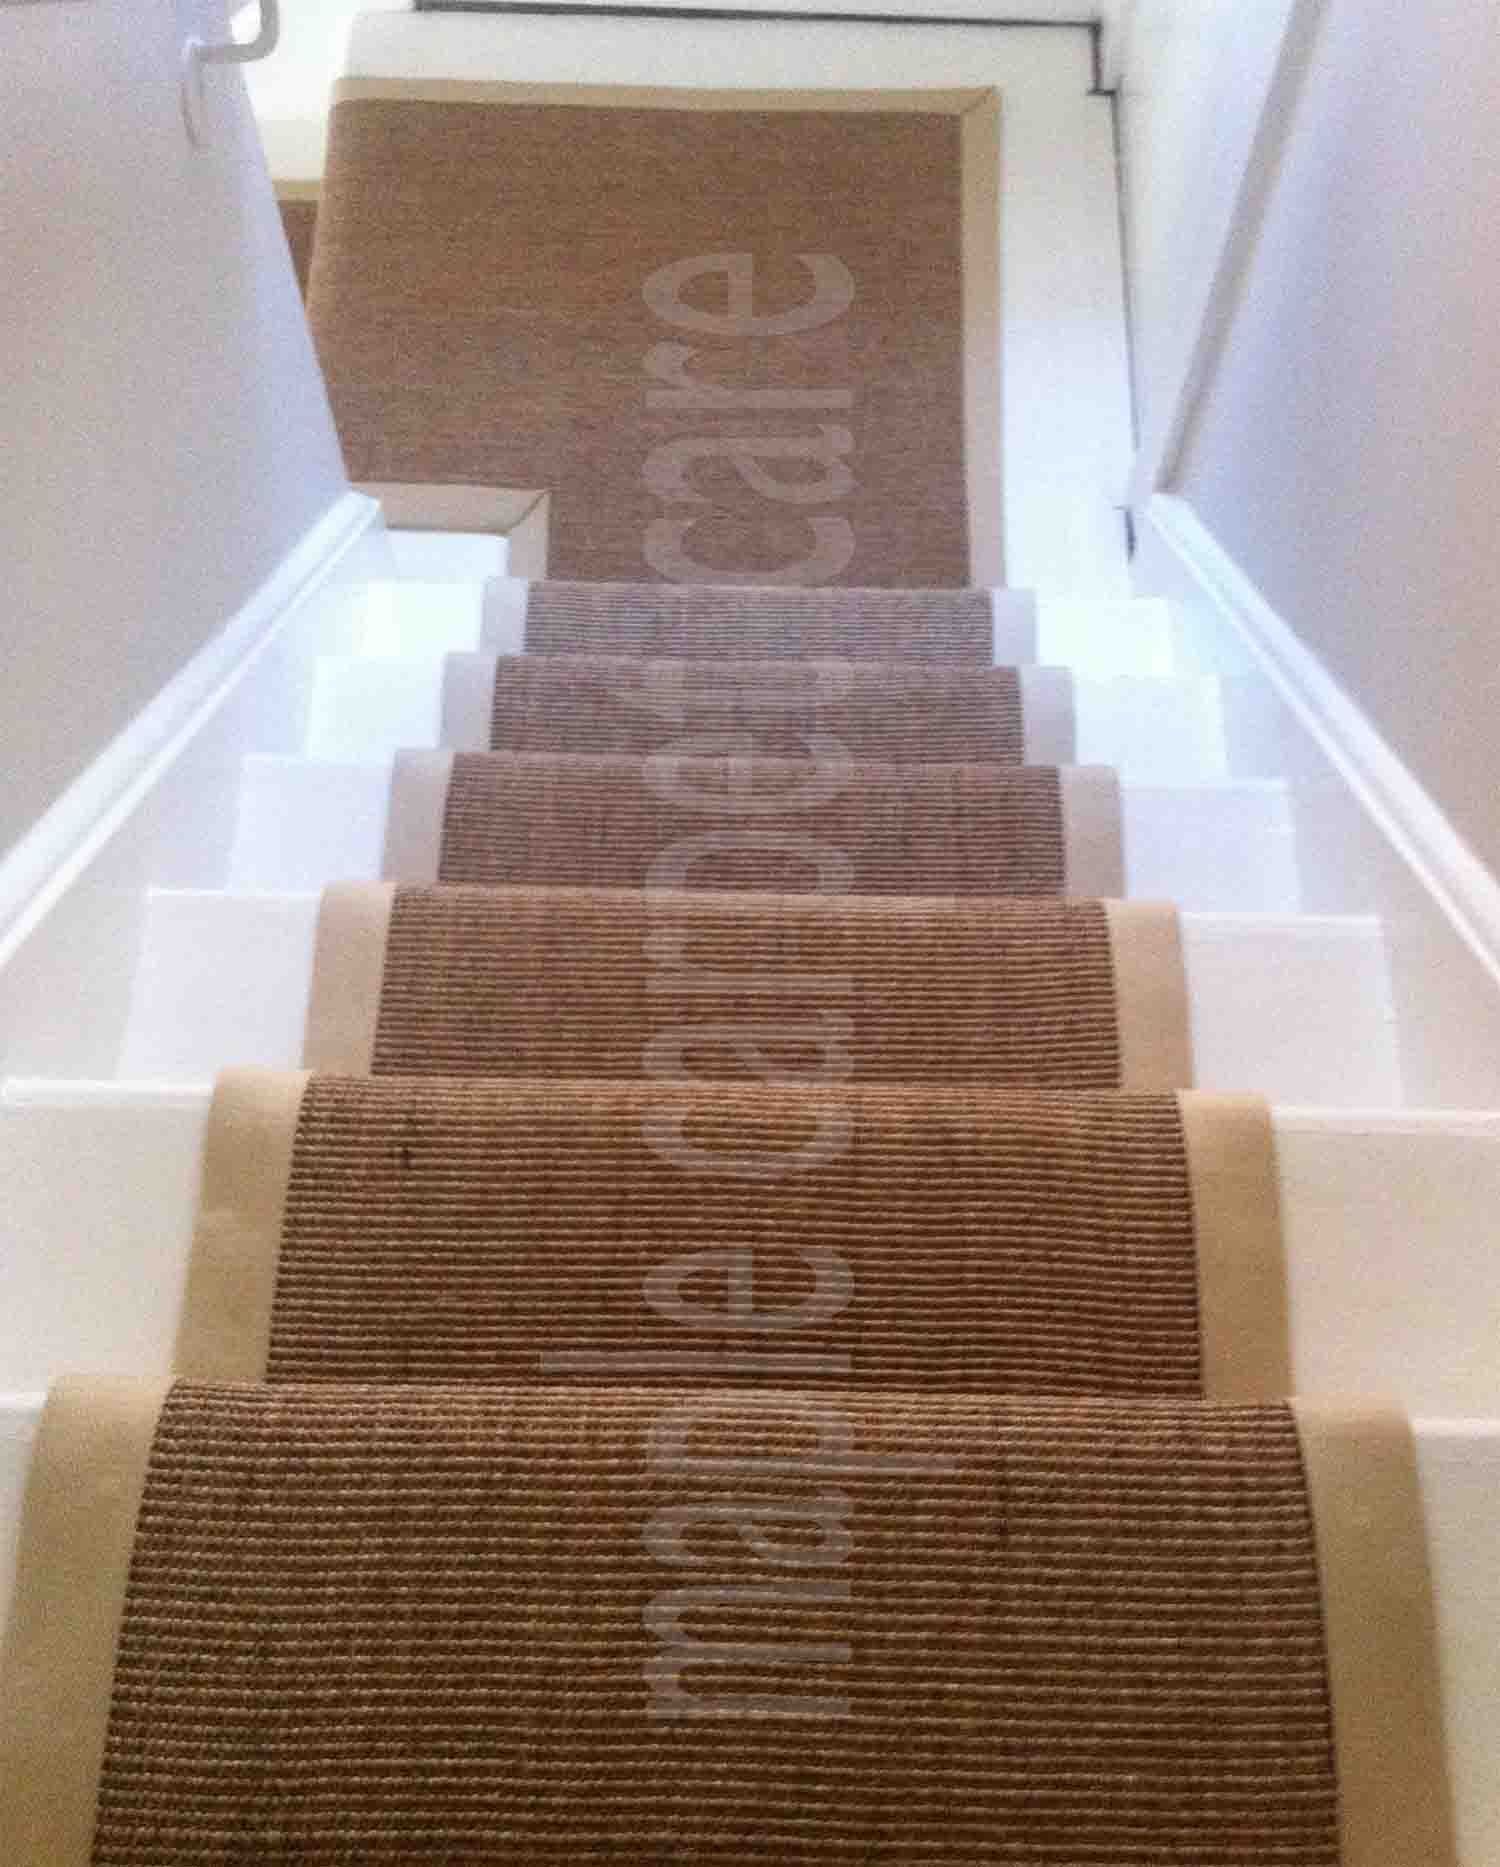 Sisal Stair Runners Toronto Wool Stair Runner Ideas With Regard To Carpet Runners For Stairs And Hallways (View 9 of 20)